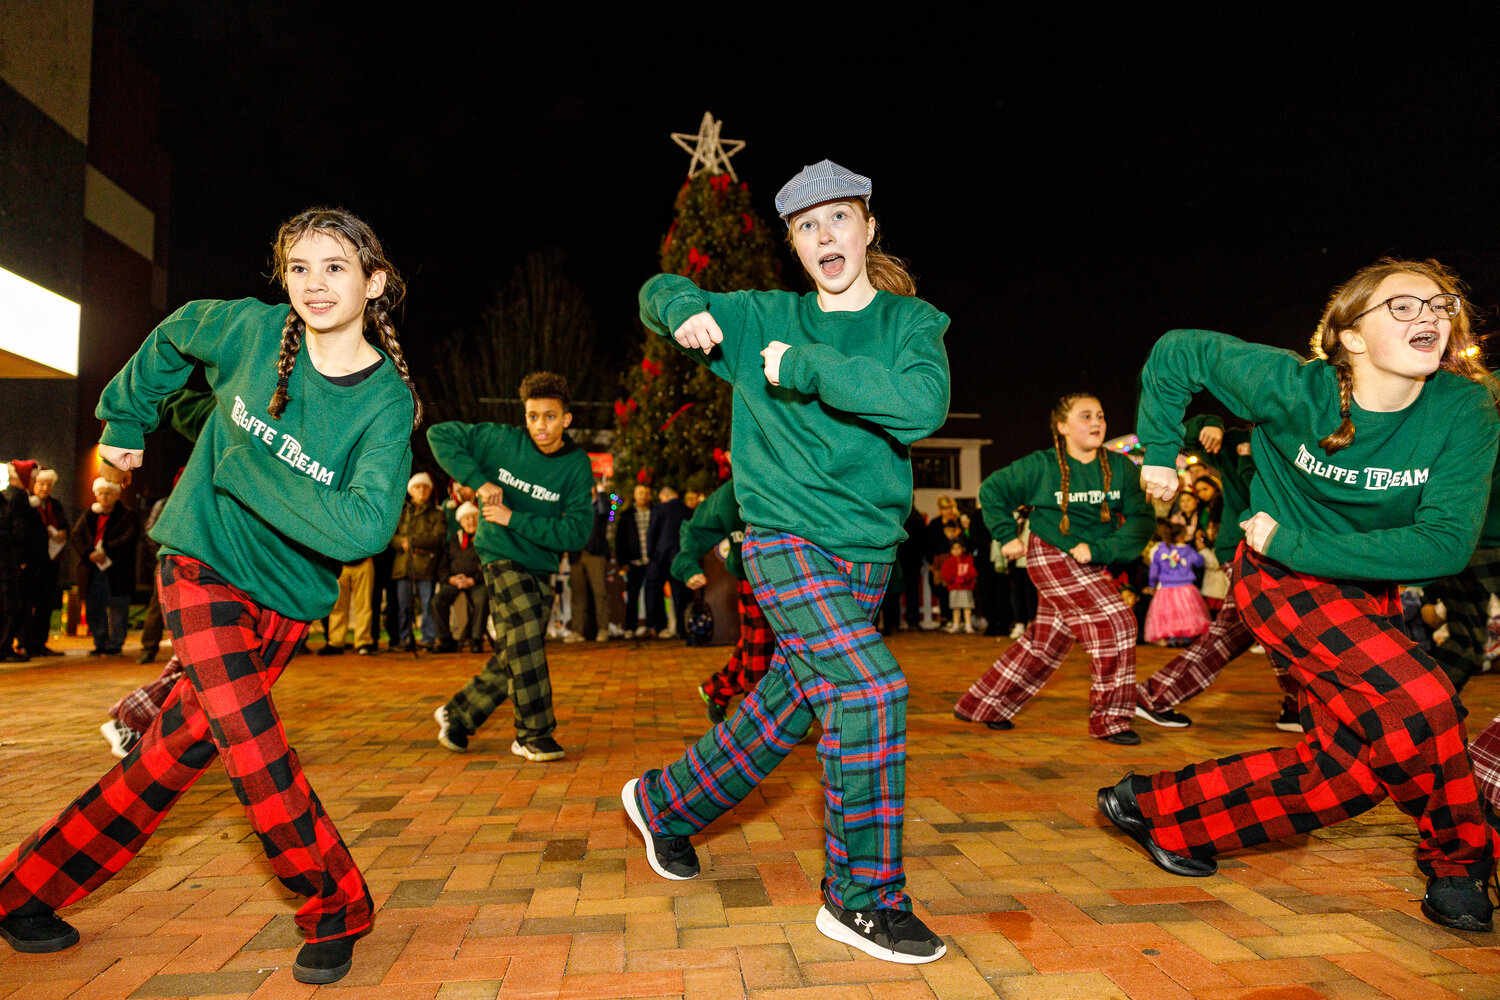 The Elite Team performed a fun and festive dance routine for the hundreds of neighbors gathered for Lynbrook village’s annual tree lighting ceremony.